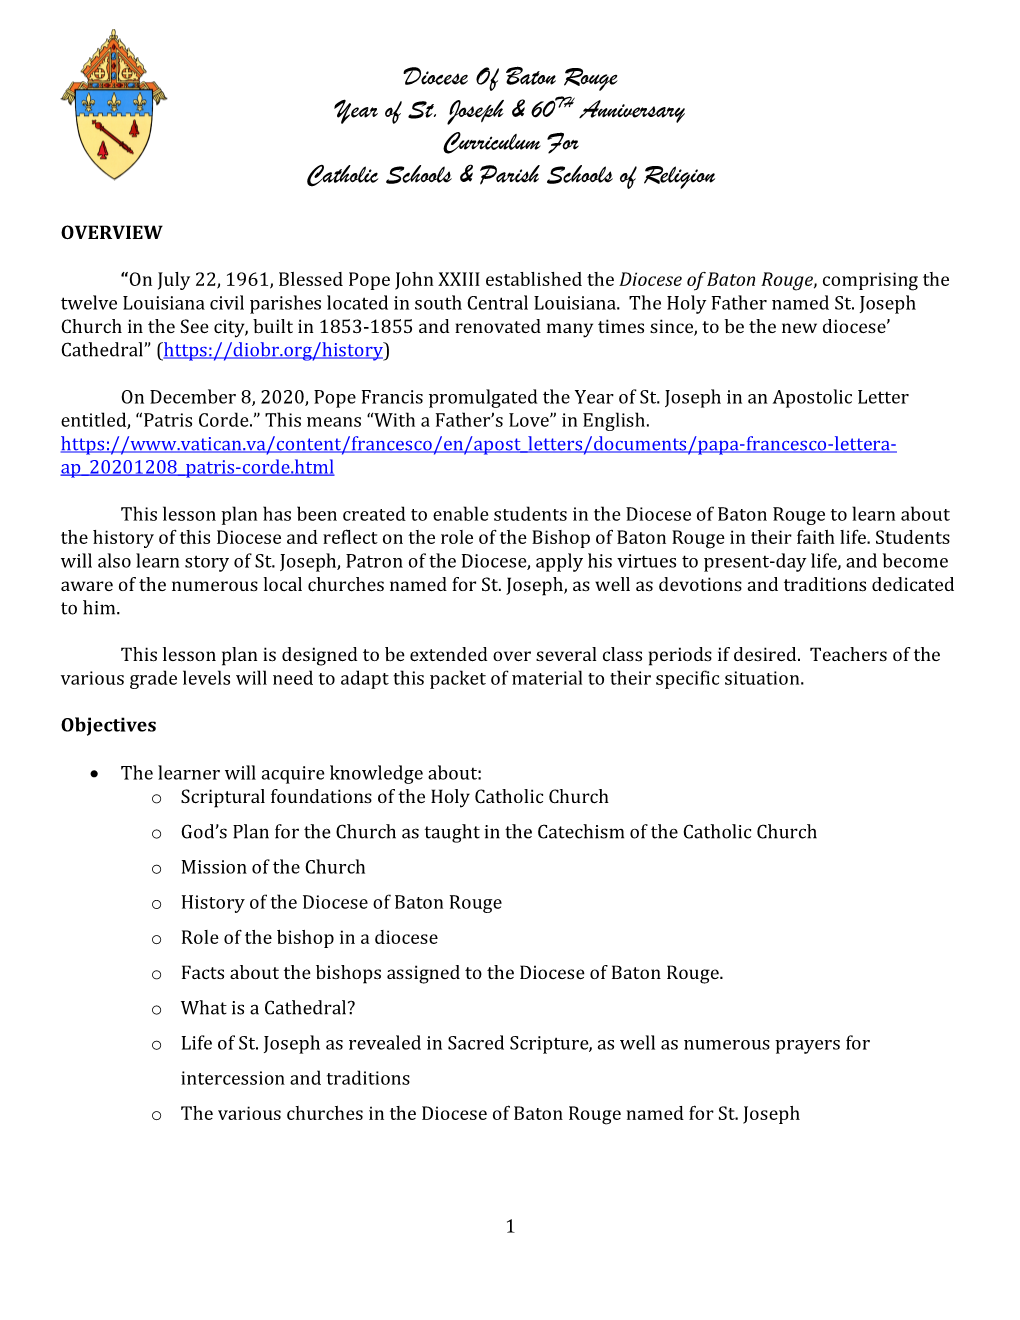 Diocese of Baton Rouge Year of St. Joseph & 60TH Anniversary